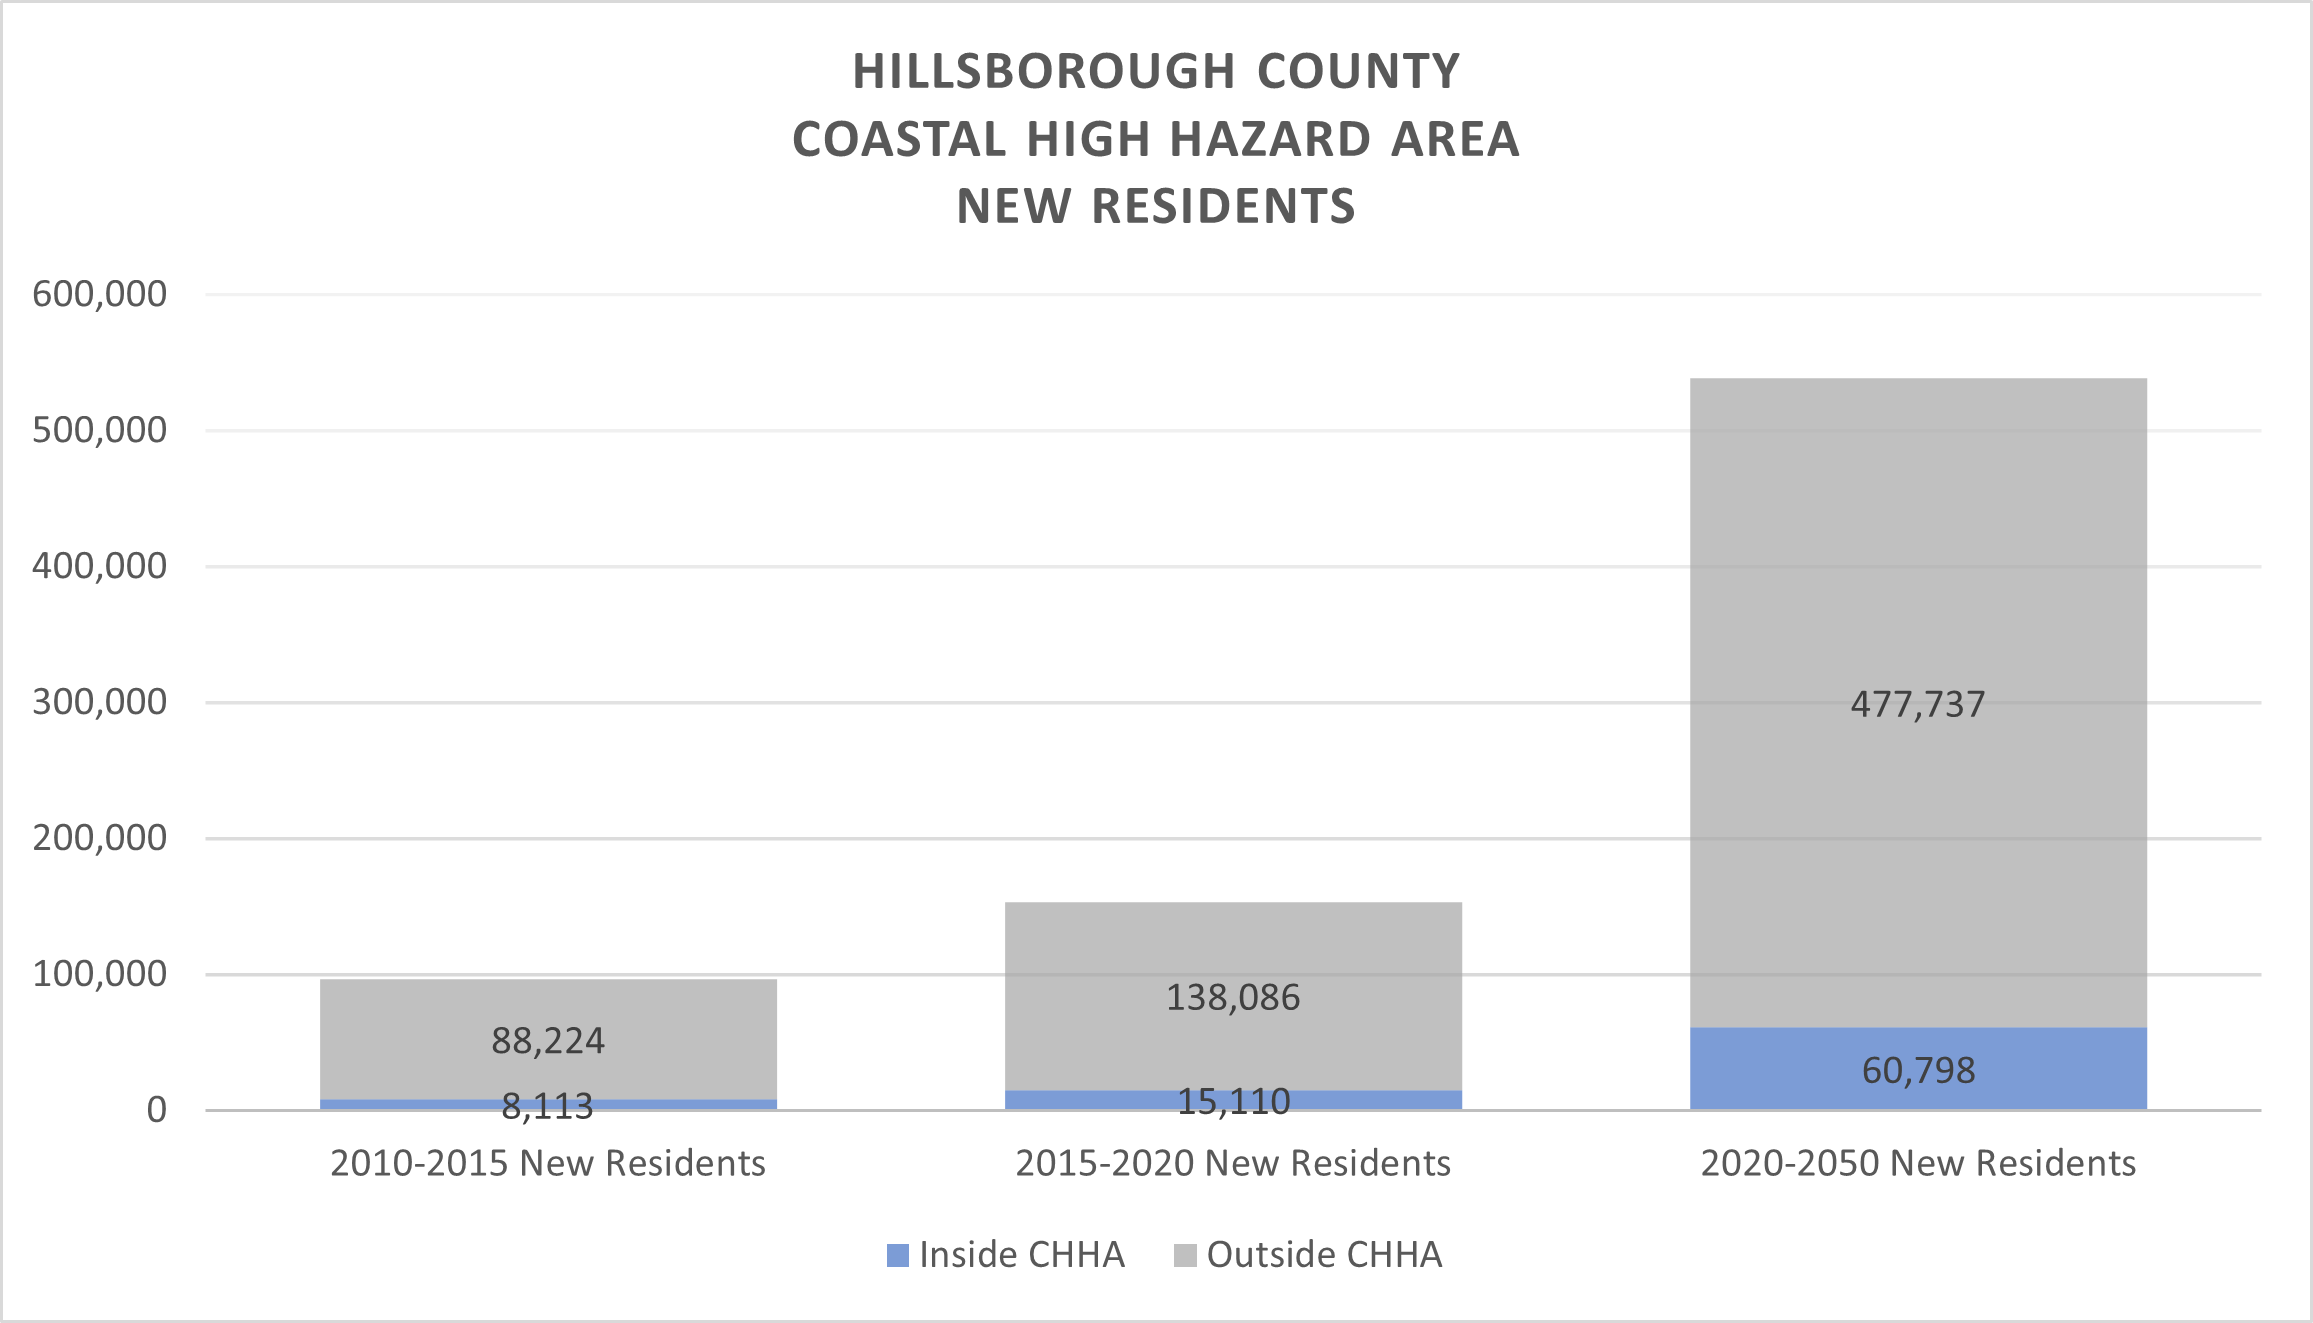 This chart shows Hillsborough County's new residents inside and outside the CHHA. From 2015 to 2020, 15,110 new residents moved inside the CHHA and 138,086 new residents moved outside CHHA. From 2020 to 2050, 60,798 new residents are expected to move inside the CHHA and 477,737 new residents are expected to move outside the CHHA.